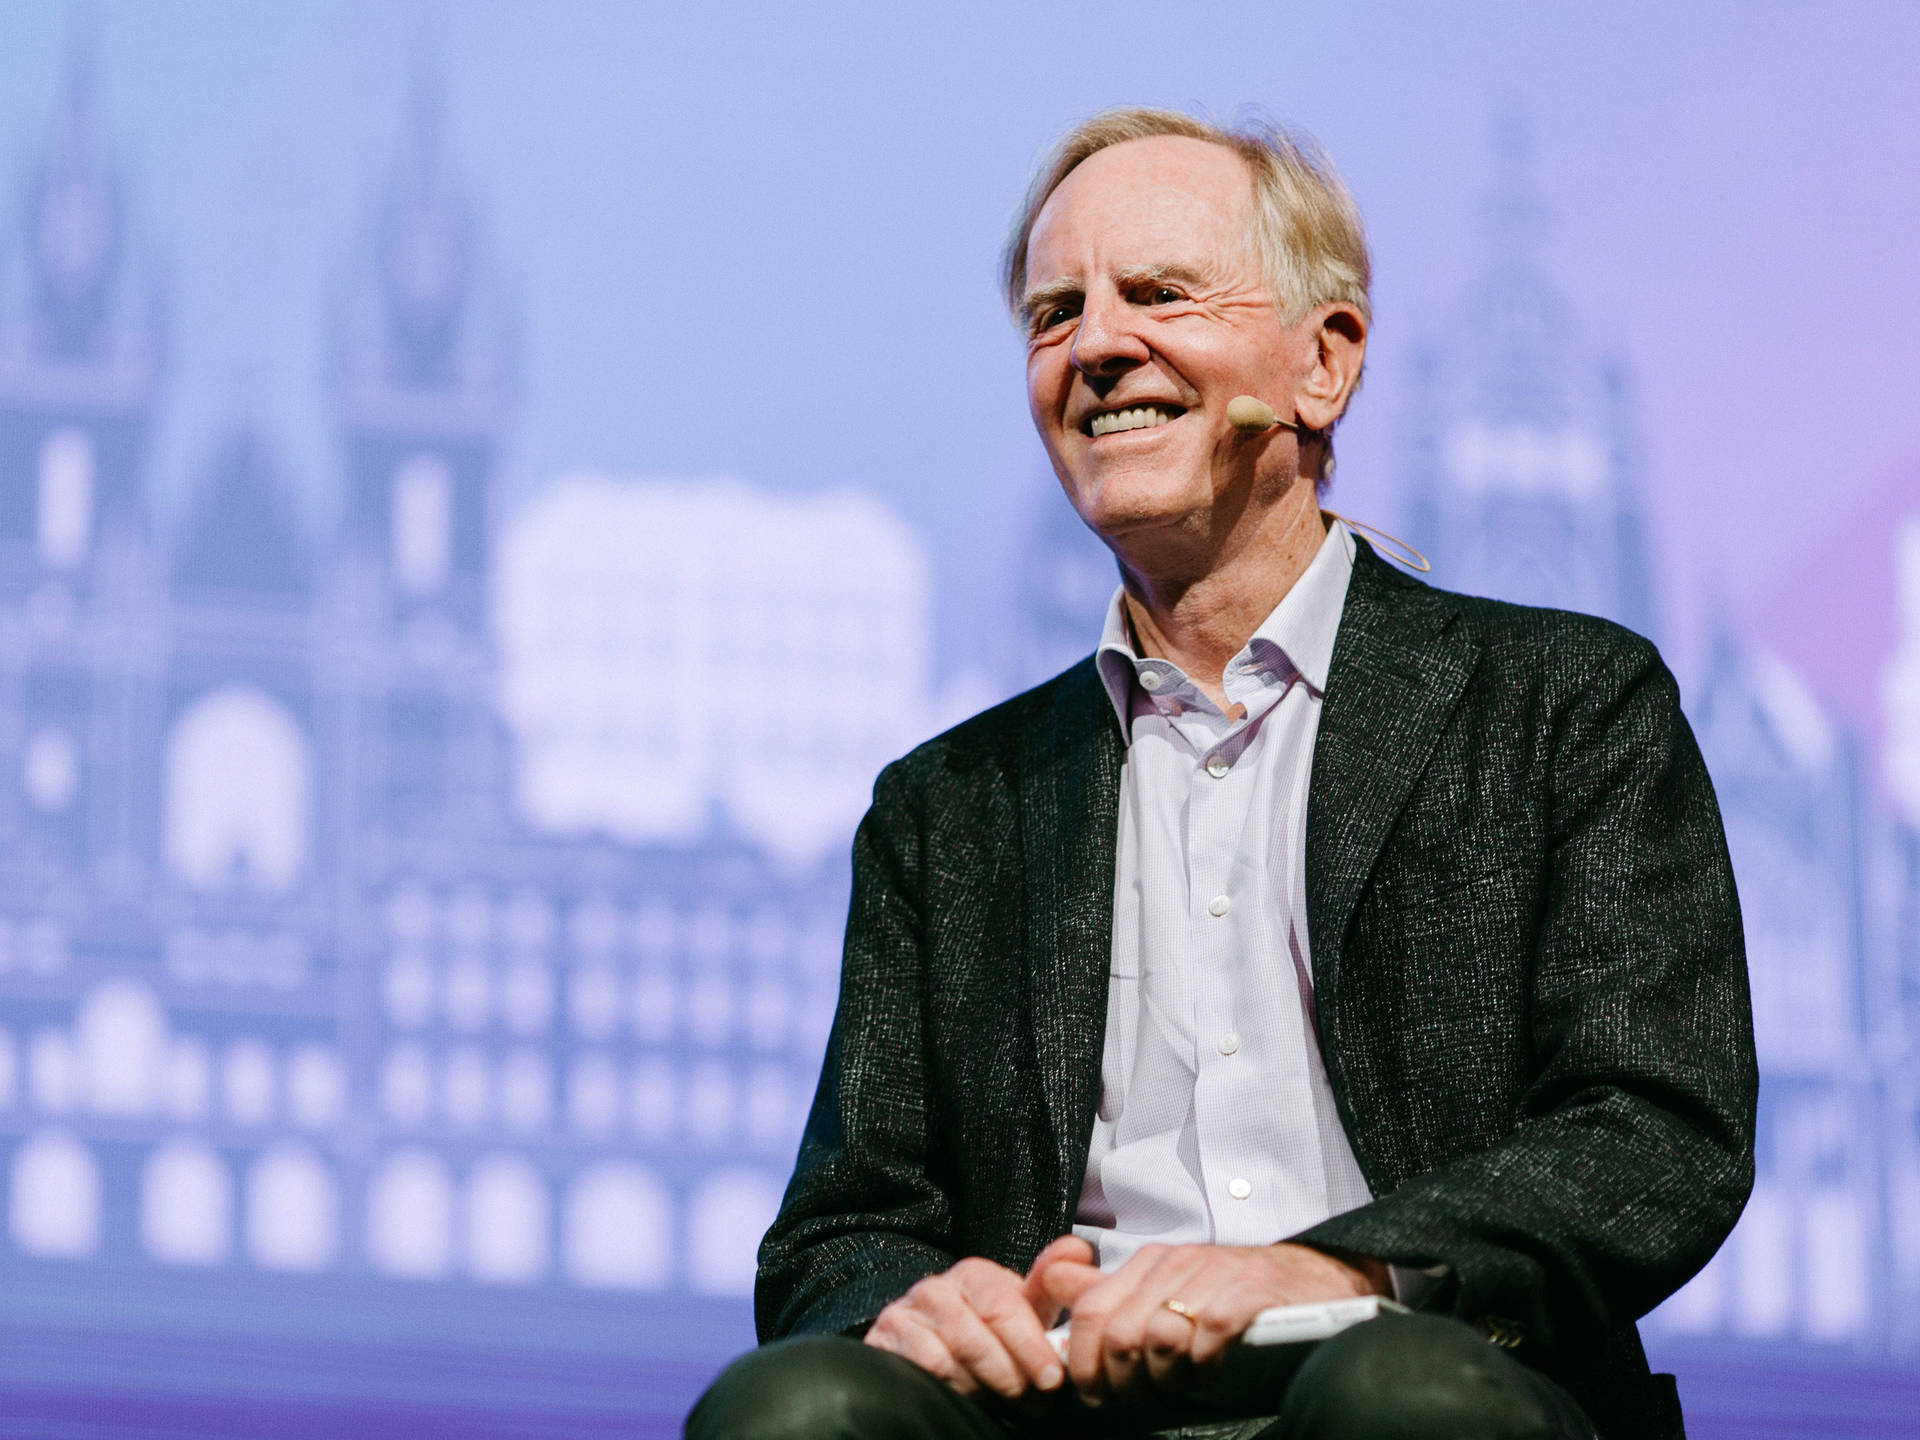 John Sculley In A Speaking Event Wallpaper